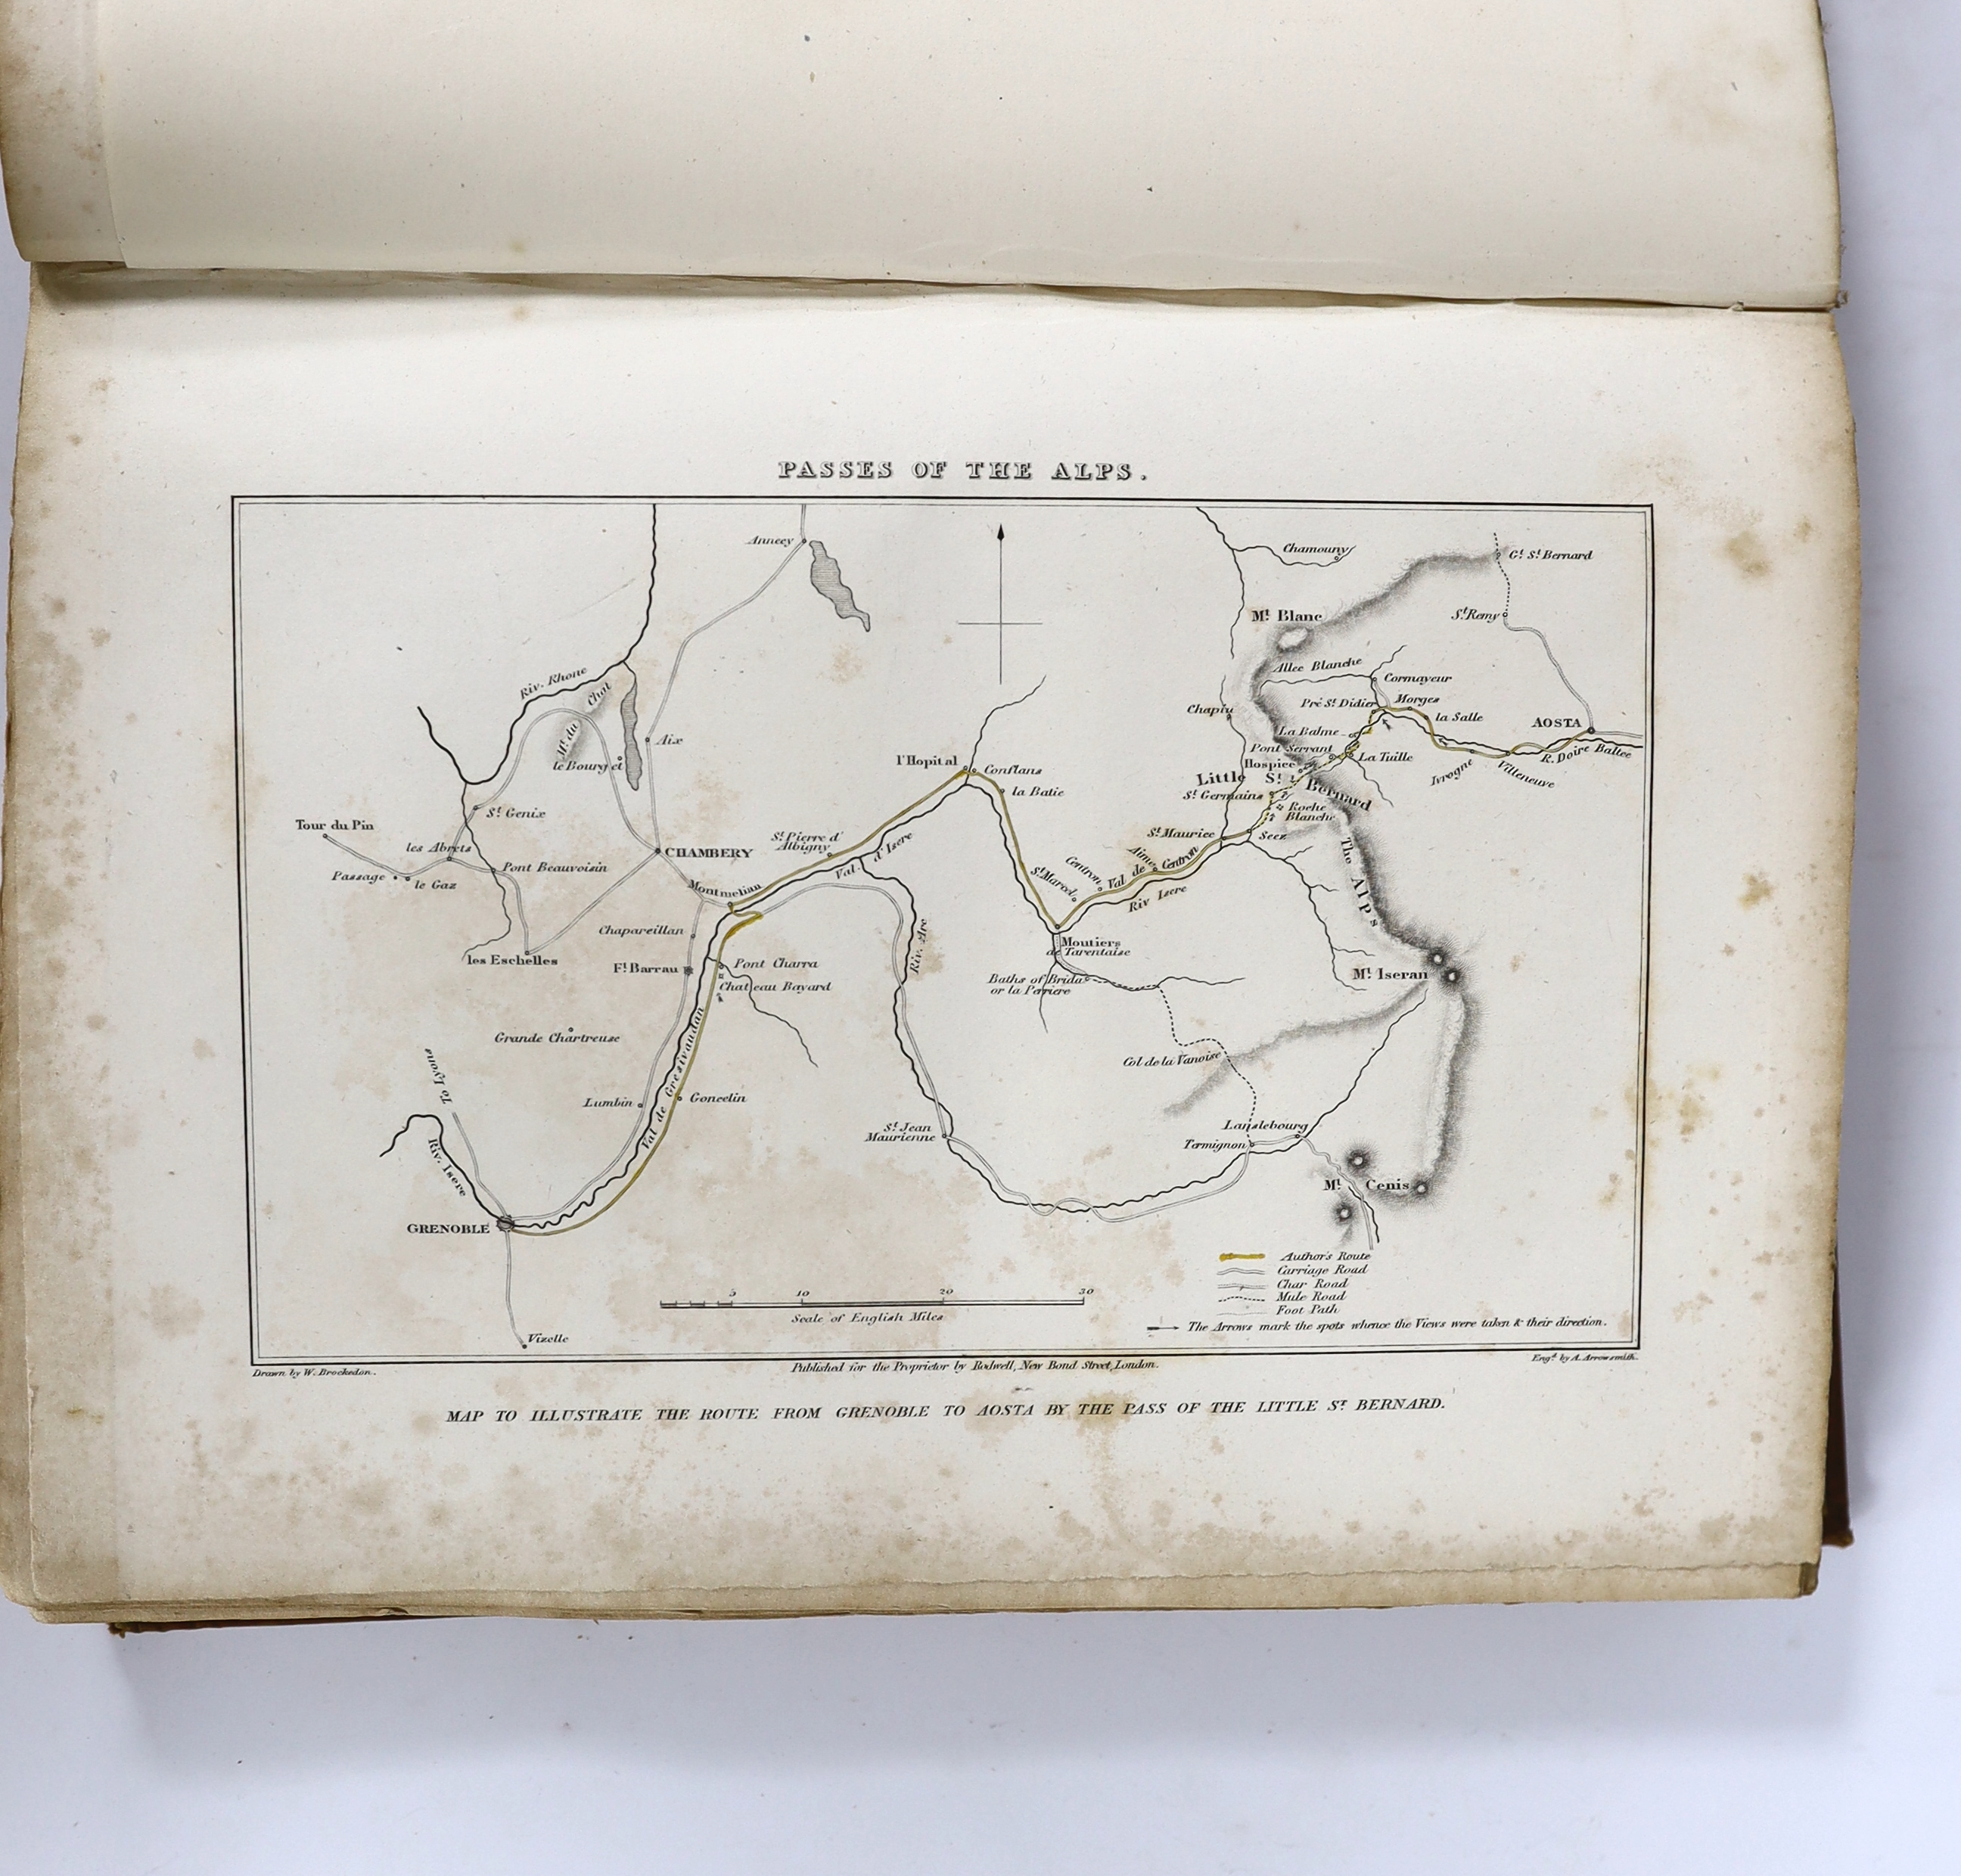 Brockedon, William - Illustration of the Passes of the Alps.....2 vols. 96 plates and 13 maps (I d-page); old cloth and leather spine labels, 4to. 1828-29